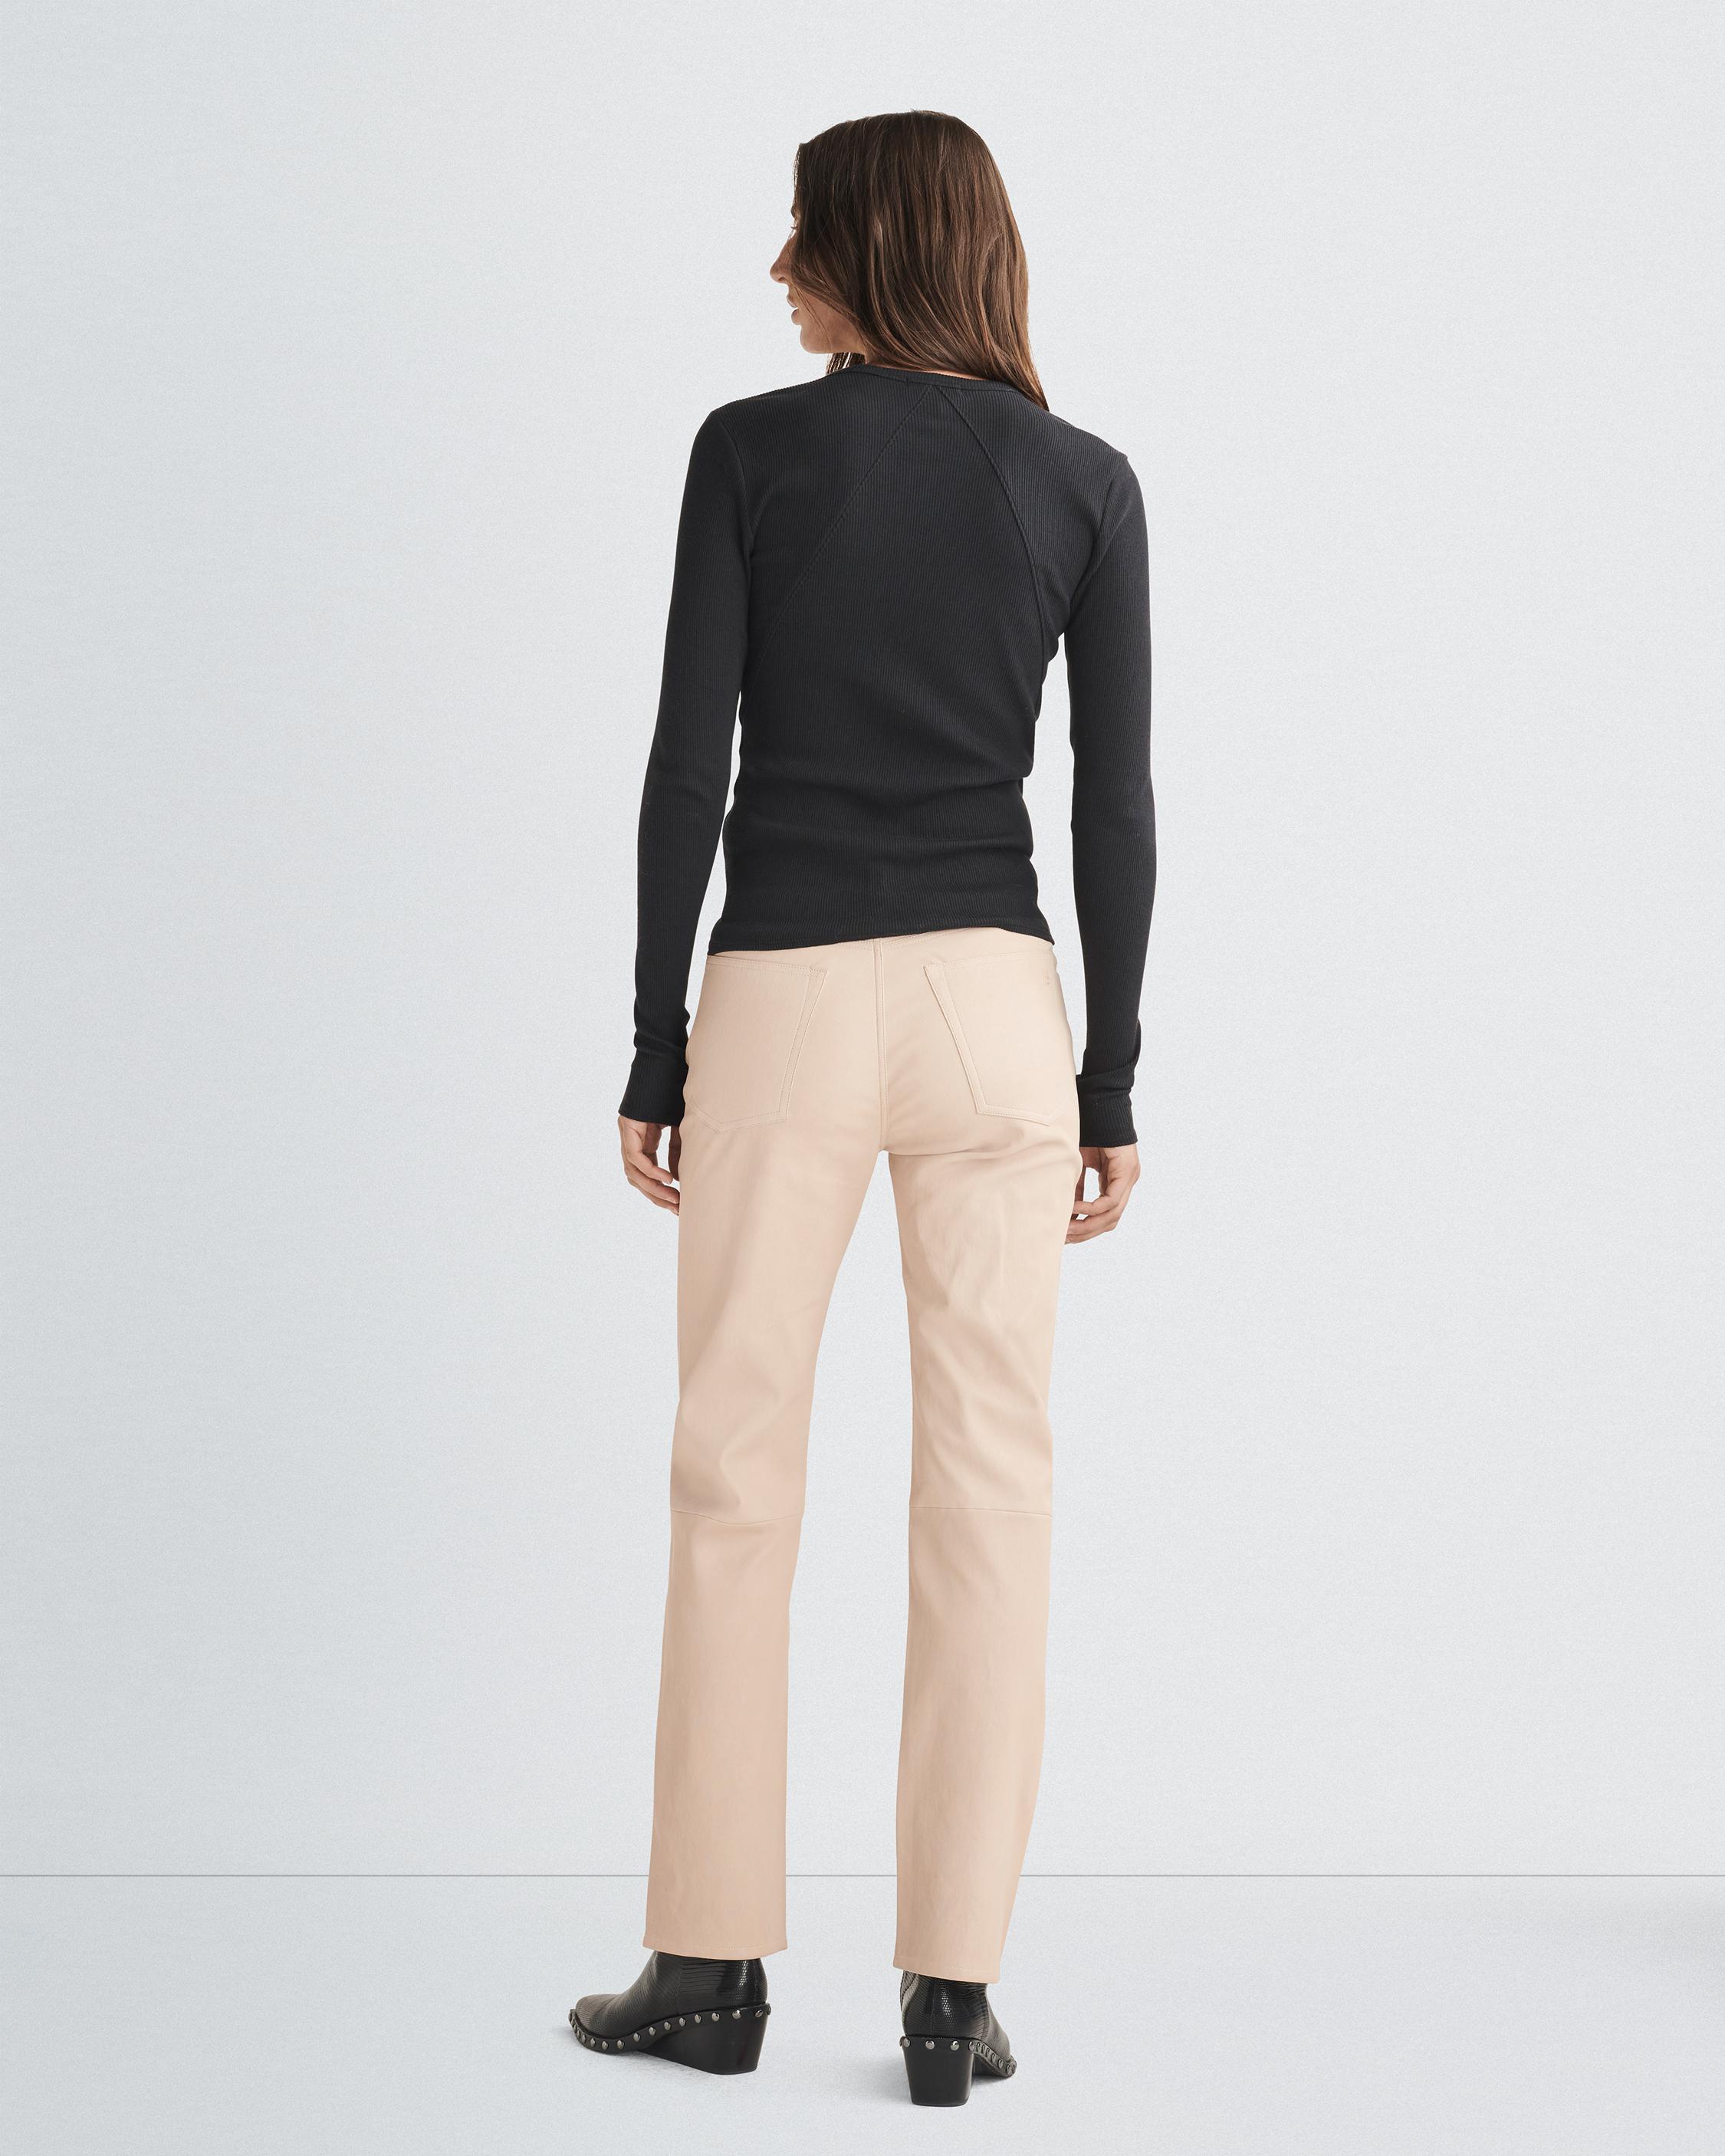 How to see more accurate Archive Sale stock : r/Aritzia